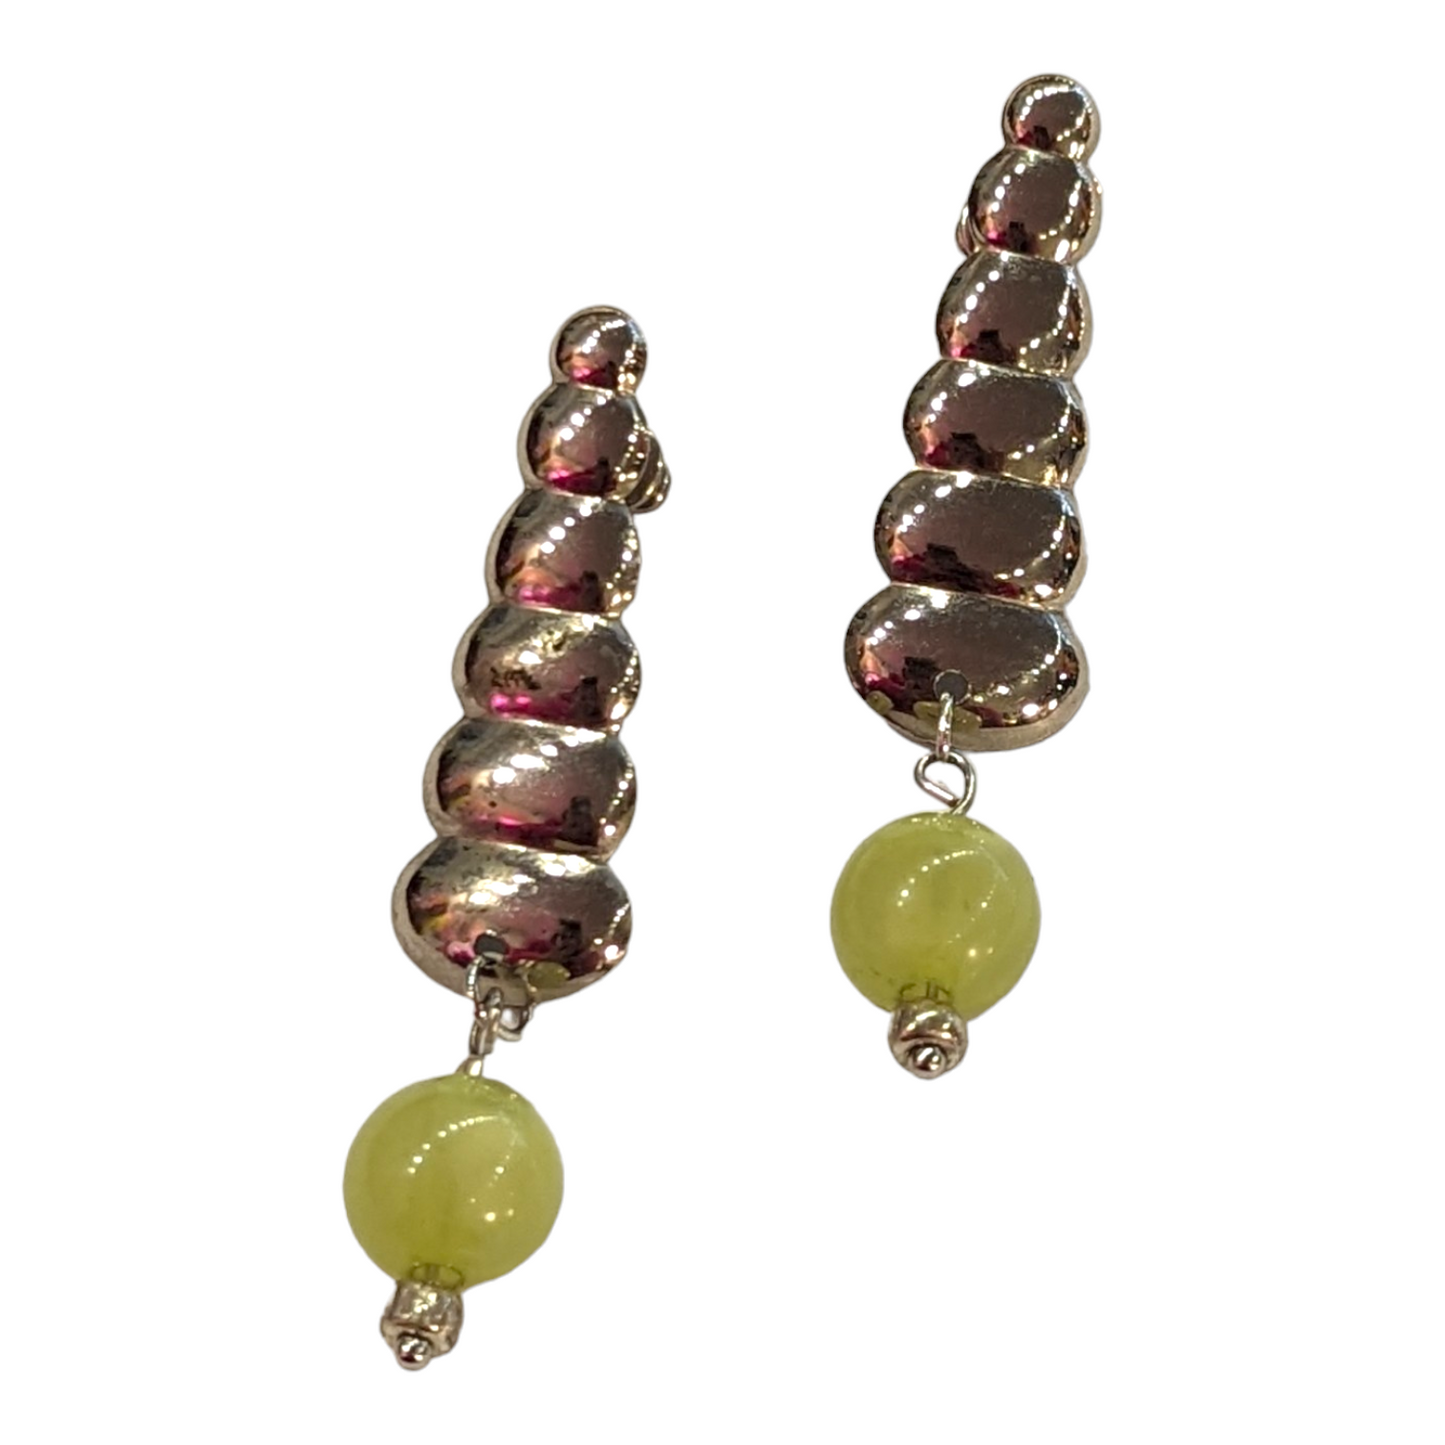 Silver and Lime Dangly Earrings by The Little Merle